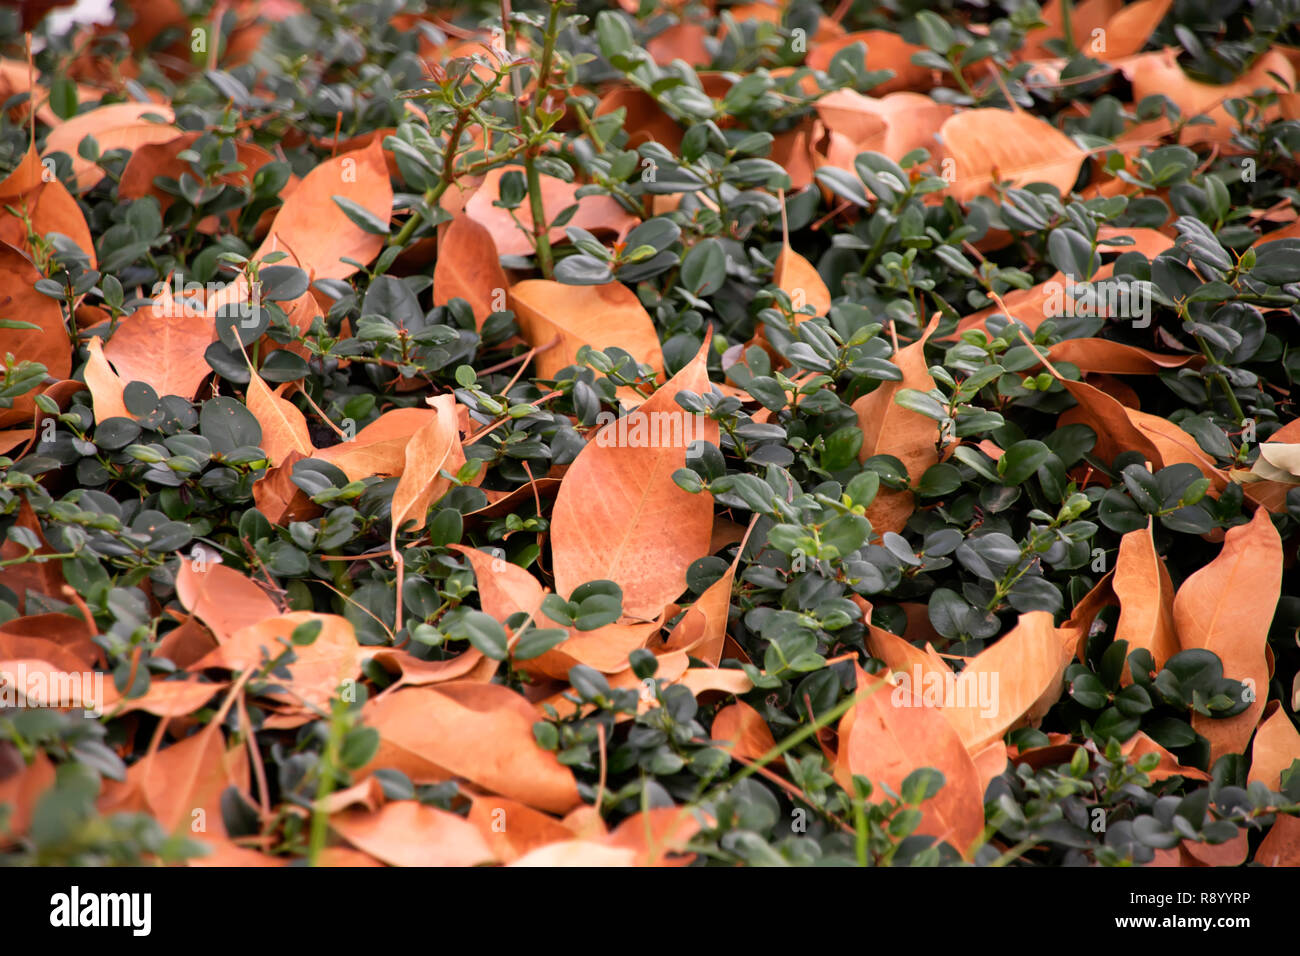 abstract background of dry brown autumn leaves among green foliage of shrubs Stock Photo